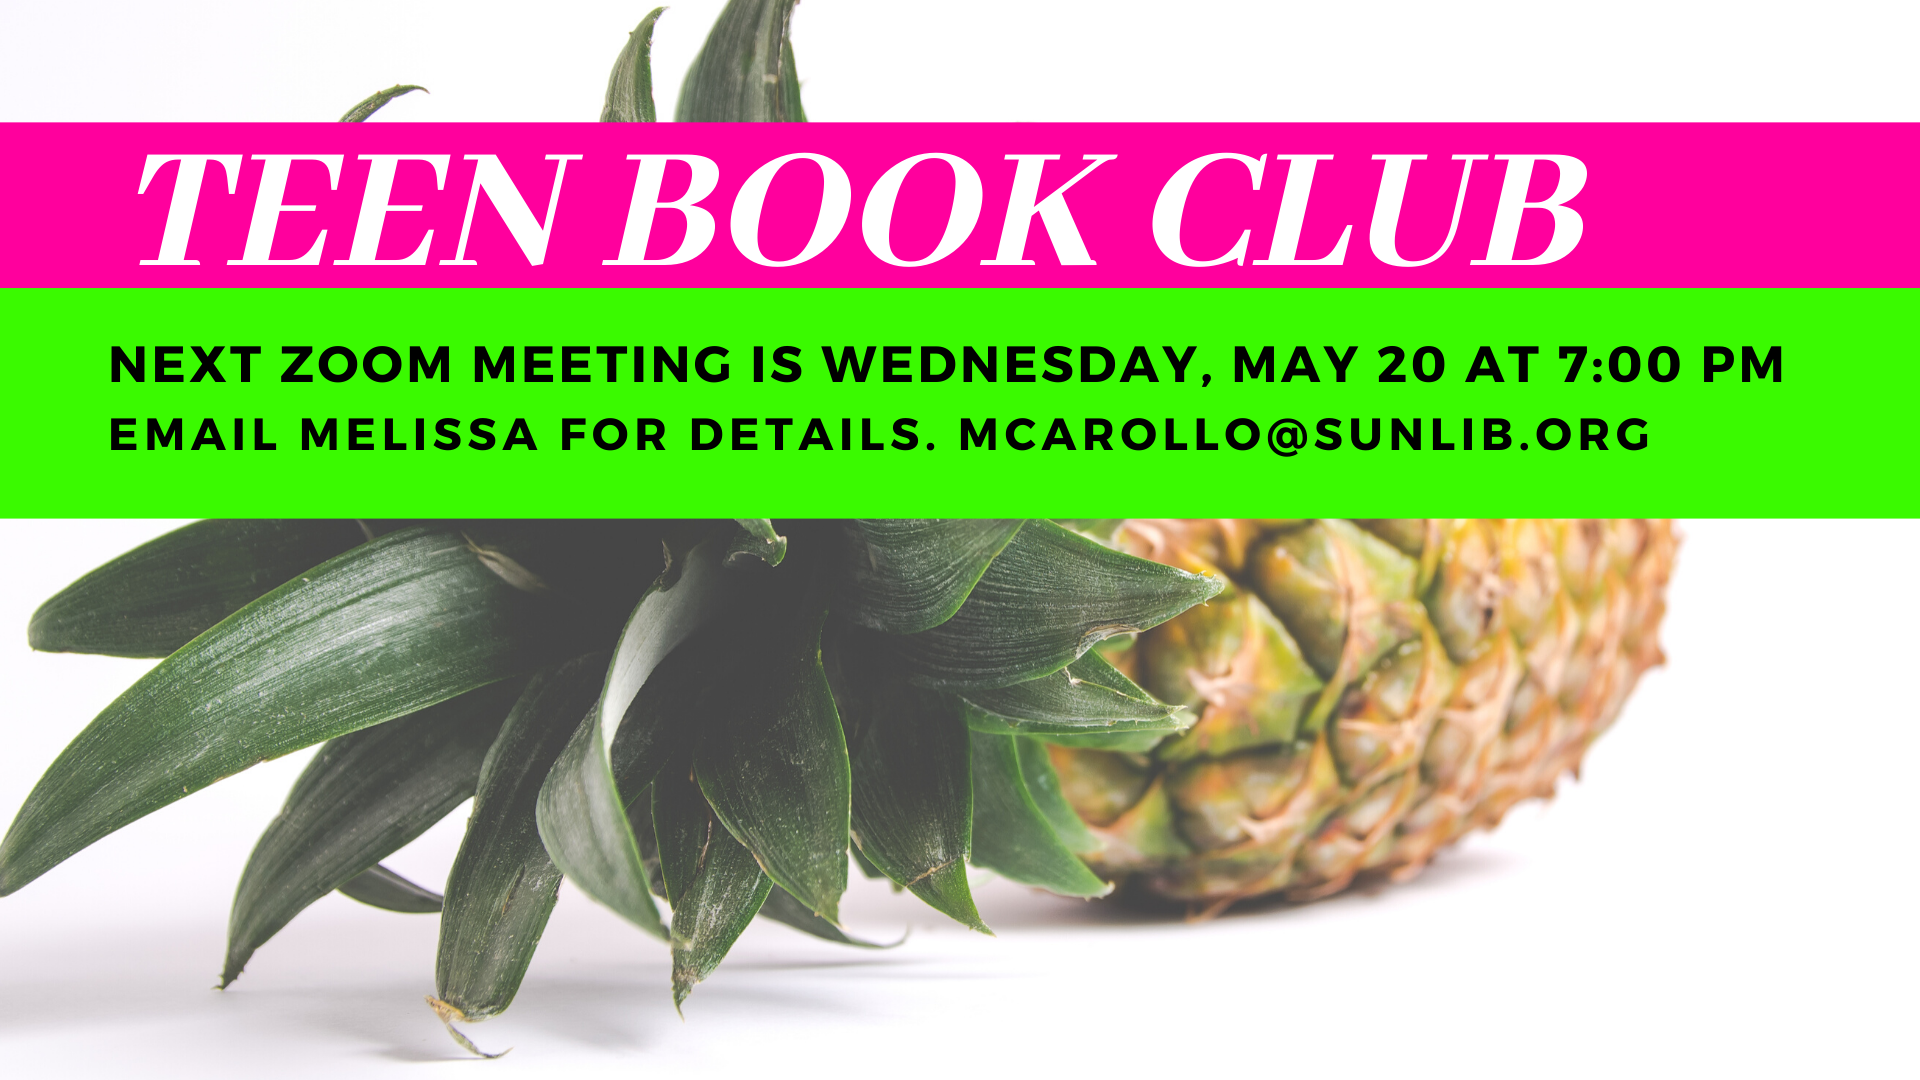 poster of a pineapple and book club details